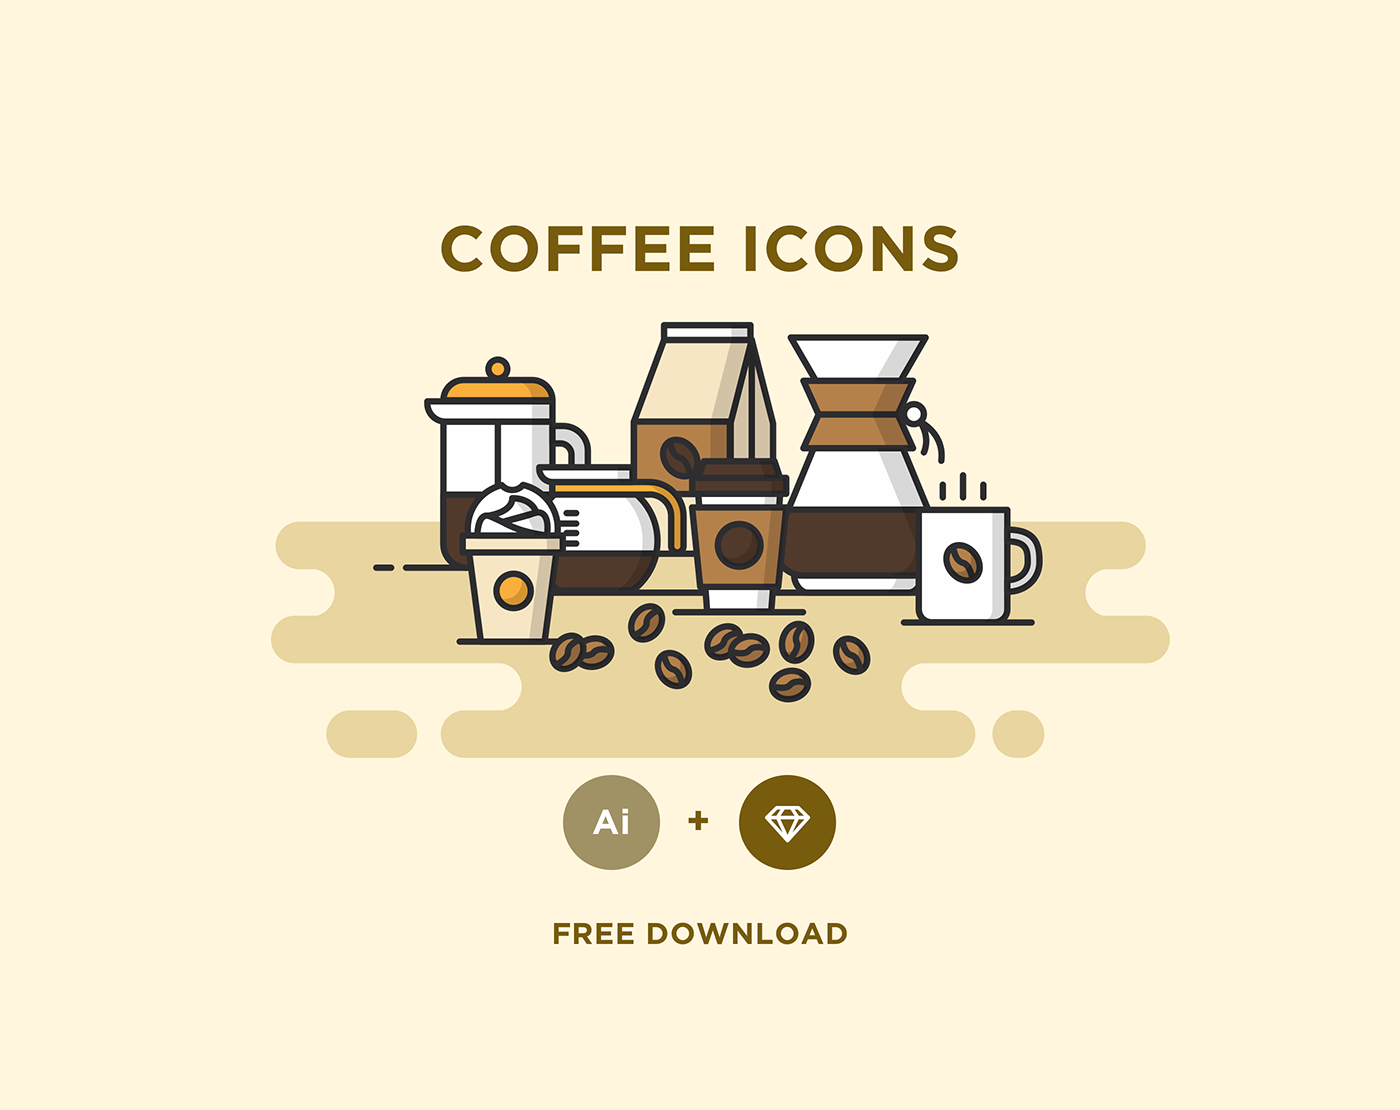 free icons free download Icon flat Coffee free icon Cocoa glass drink